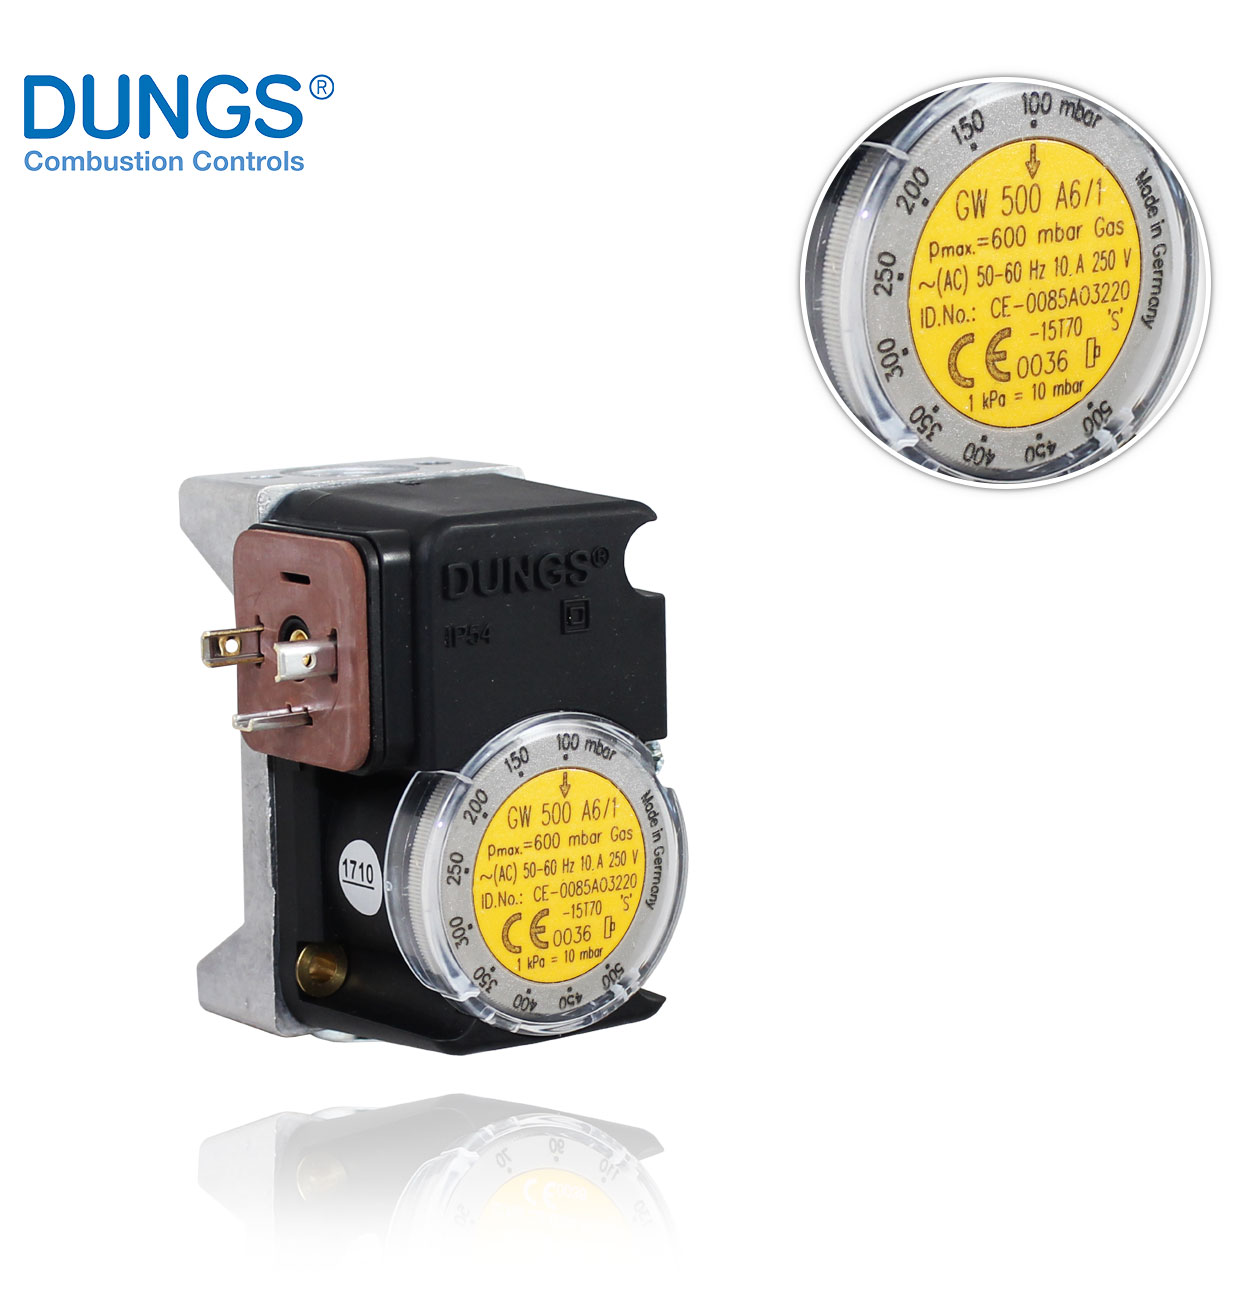 DUNGS 242678 GW 500 A6/1, 100/500mbar, PRESSURE SWITCH with time delay